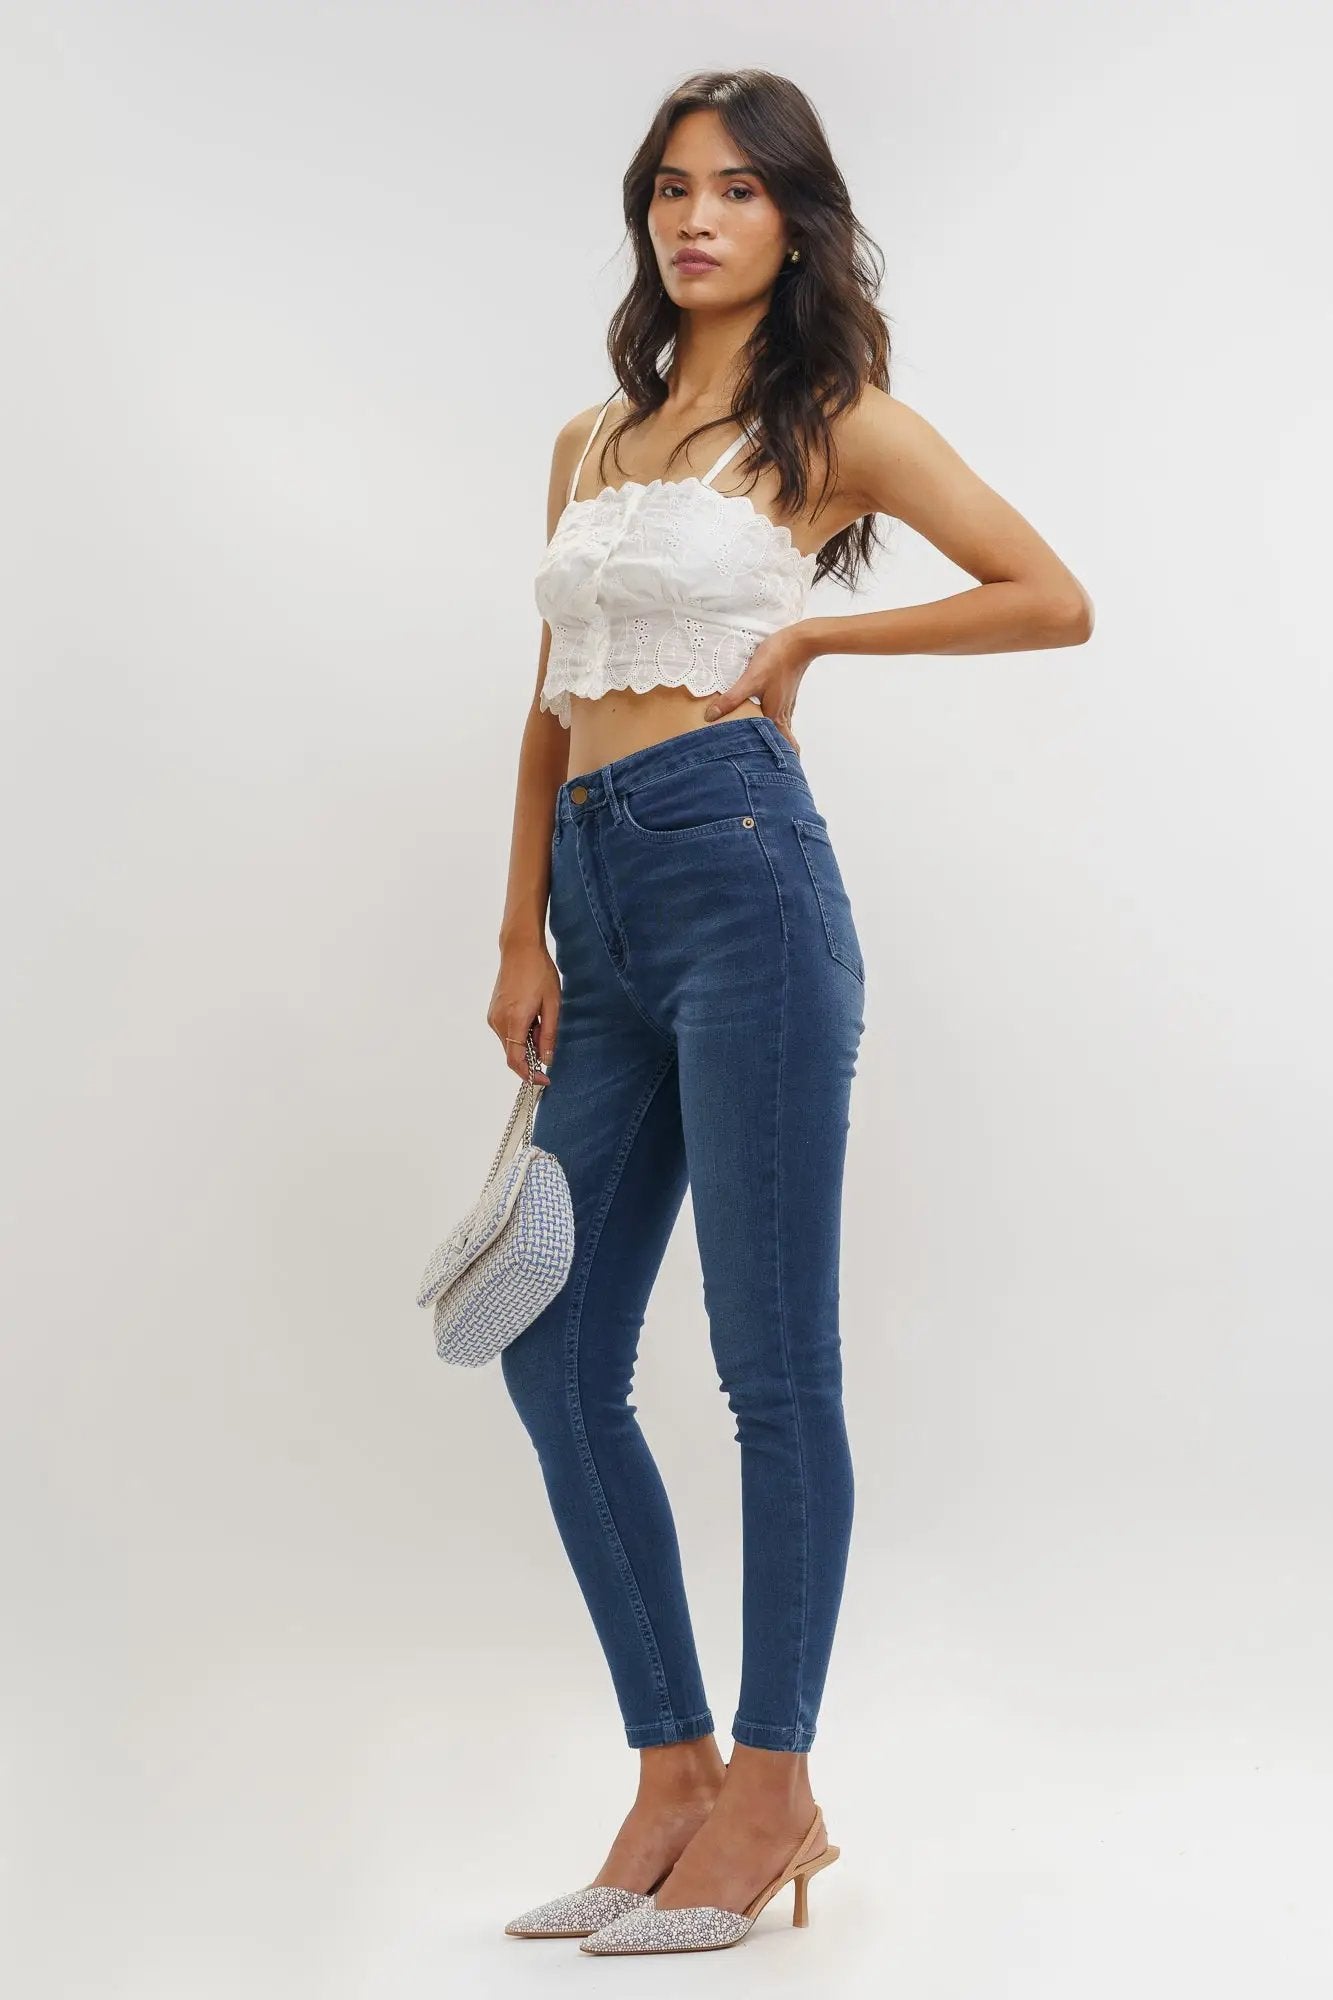 Buy High Waisted Women's Jeans Pants Online Starting @ ₹790